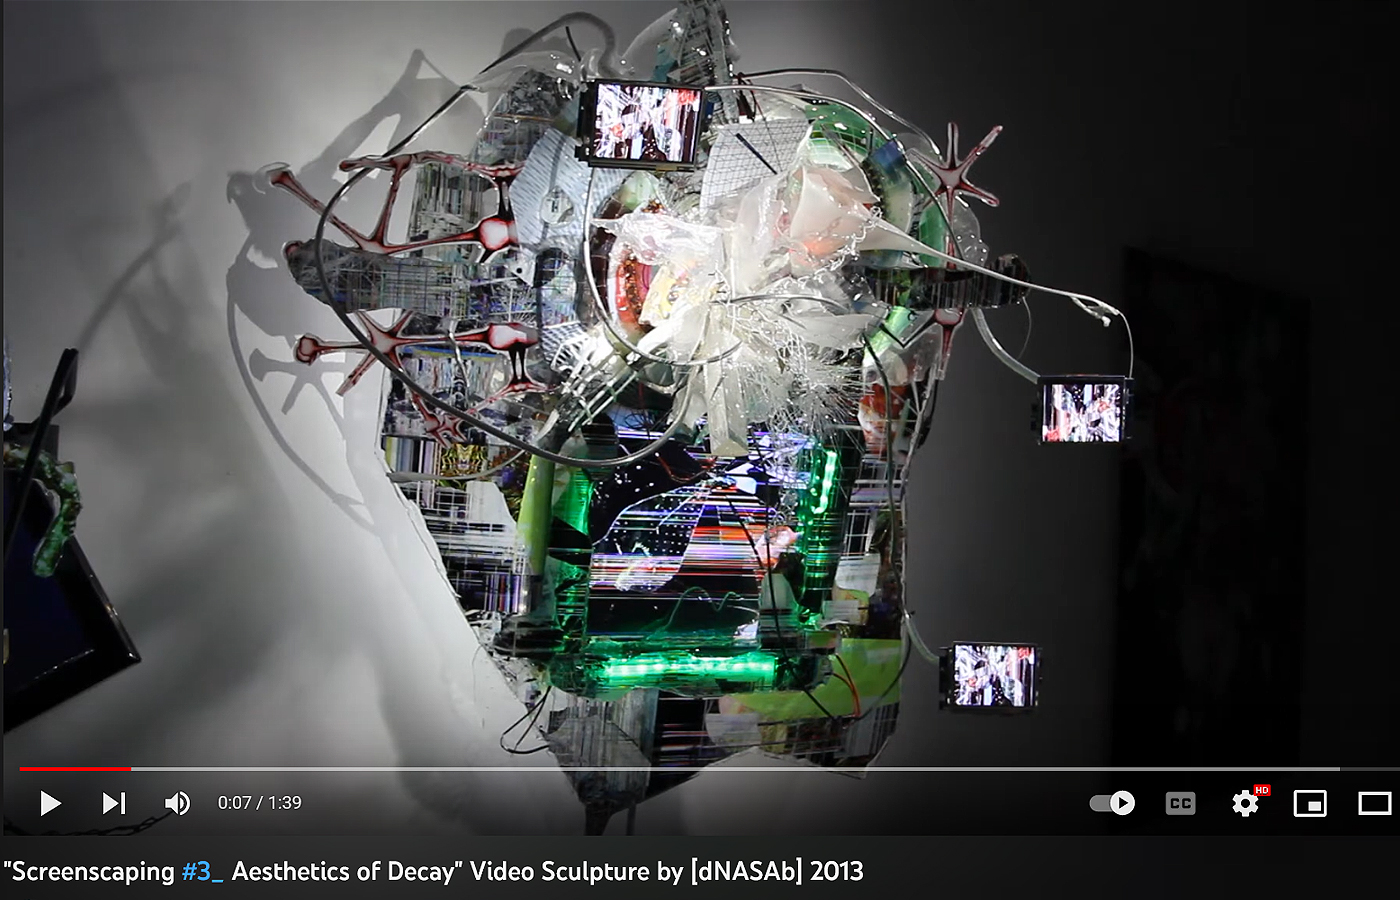 [dNASAb] exhibits "Screenscaping #3"; 4 channel video sculpture at Lesley Heller Workspace gallery..